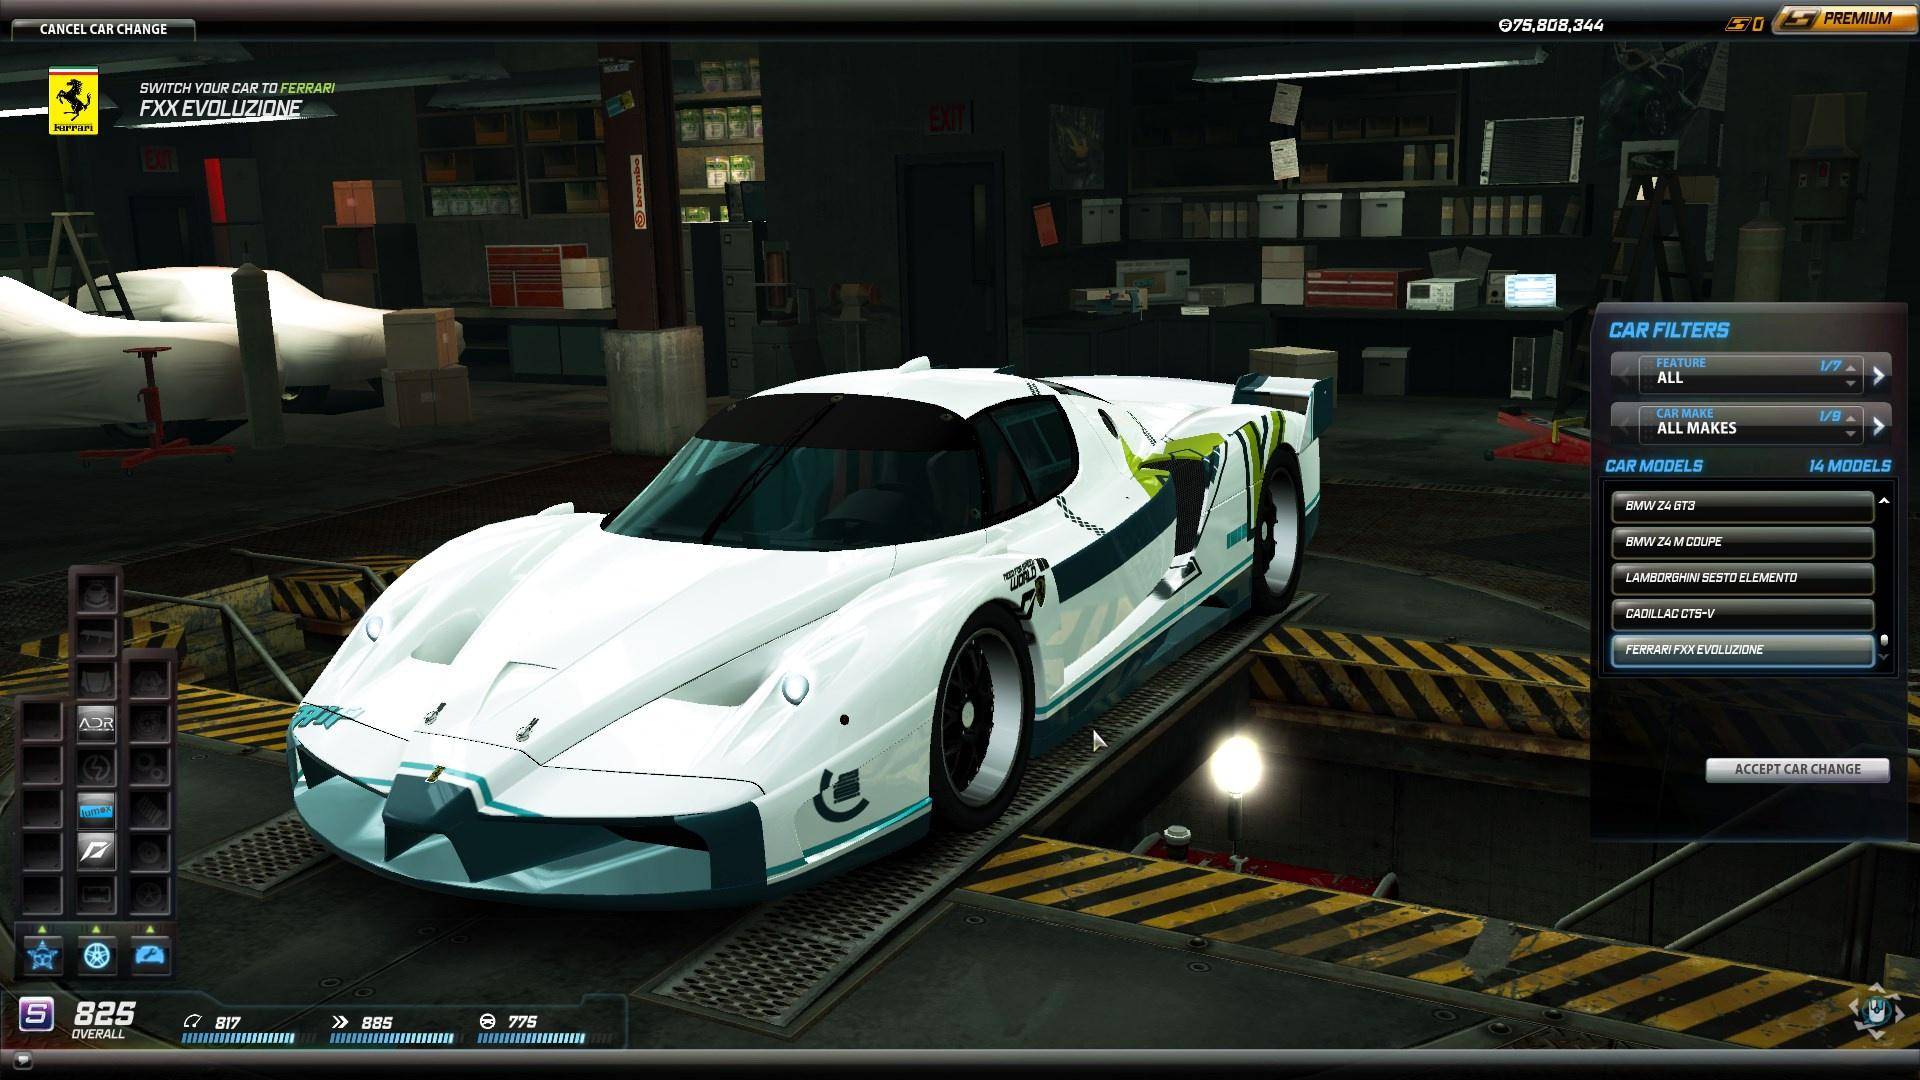 RELASE] Precompiled Need for Speed World - Soapbox - Server | Page 4 |  RaGEZONE - MMO Development Forums